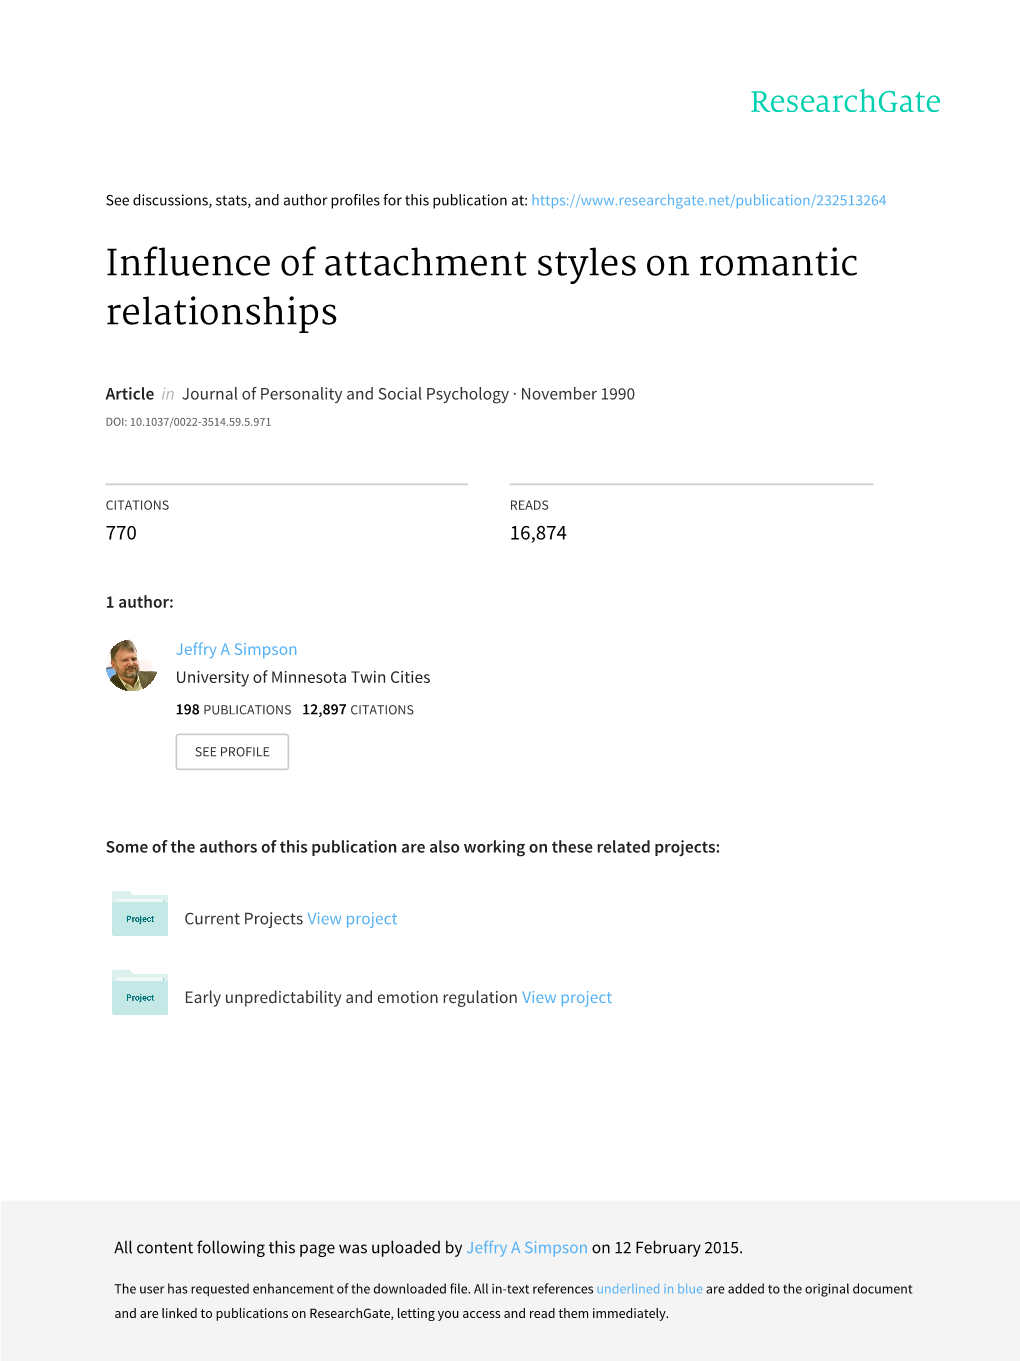 Influence of Attachment Styles on Romantic Relationships